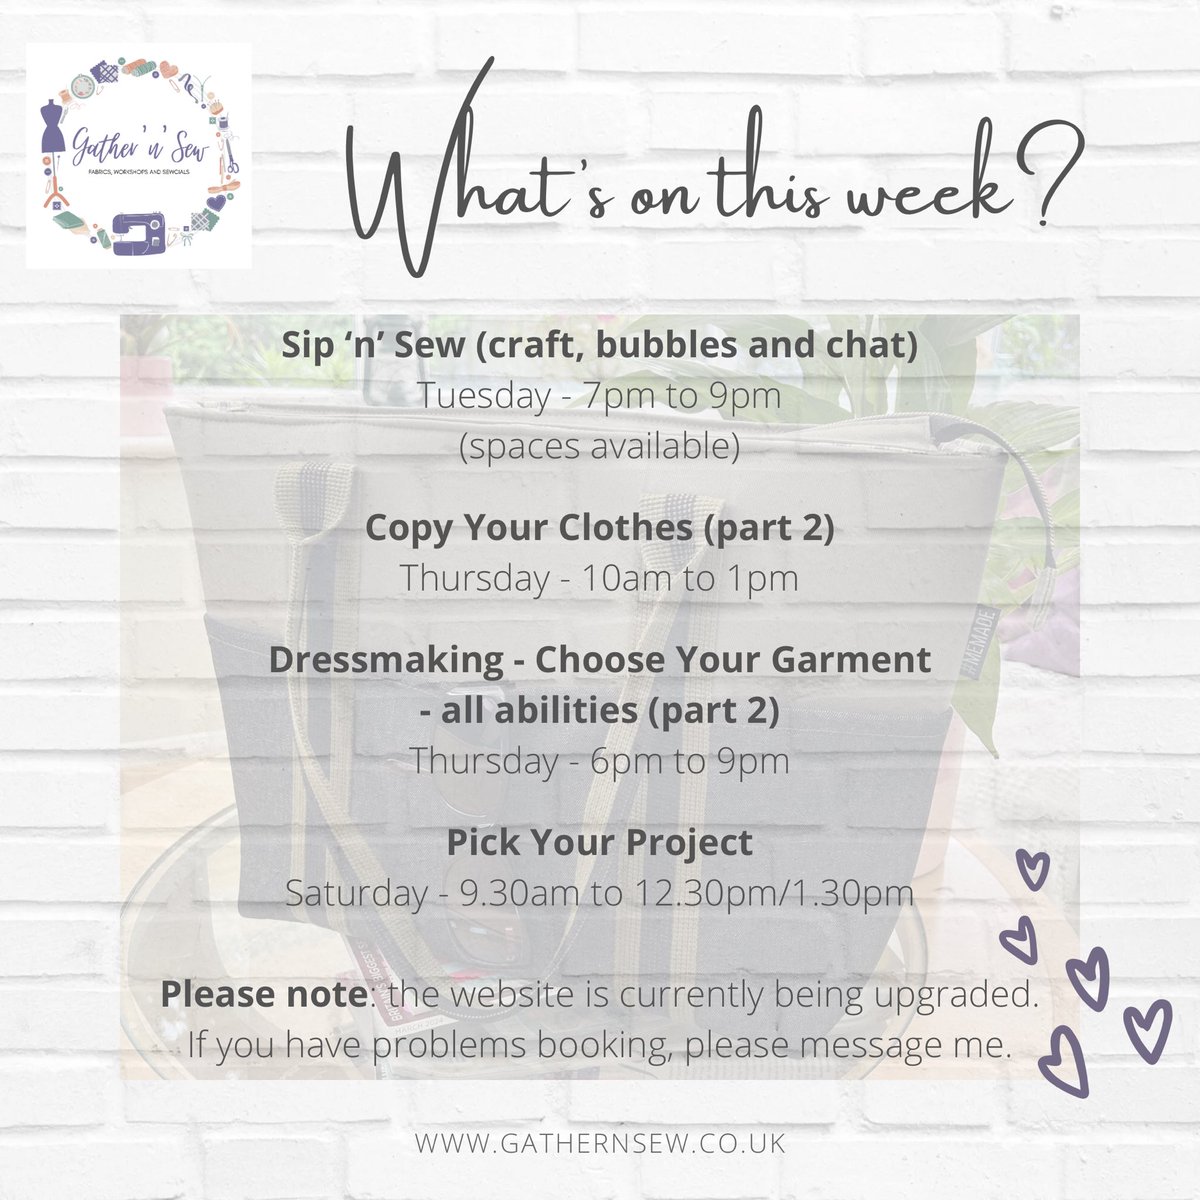 Are you ready for a new week? Please note that our website is currently being upgraded to its new version. Yay!!  If you have any problems booking, please let me know. I’m so sorry for any inconvenience. 

Wishing you a lovely week 💜

#gathernsew #learntosew #sewingclasses